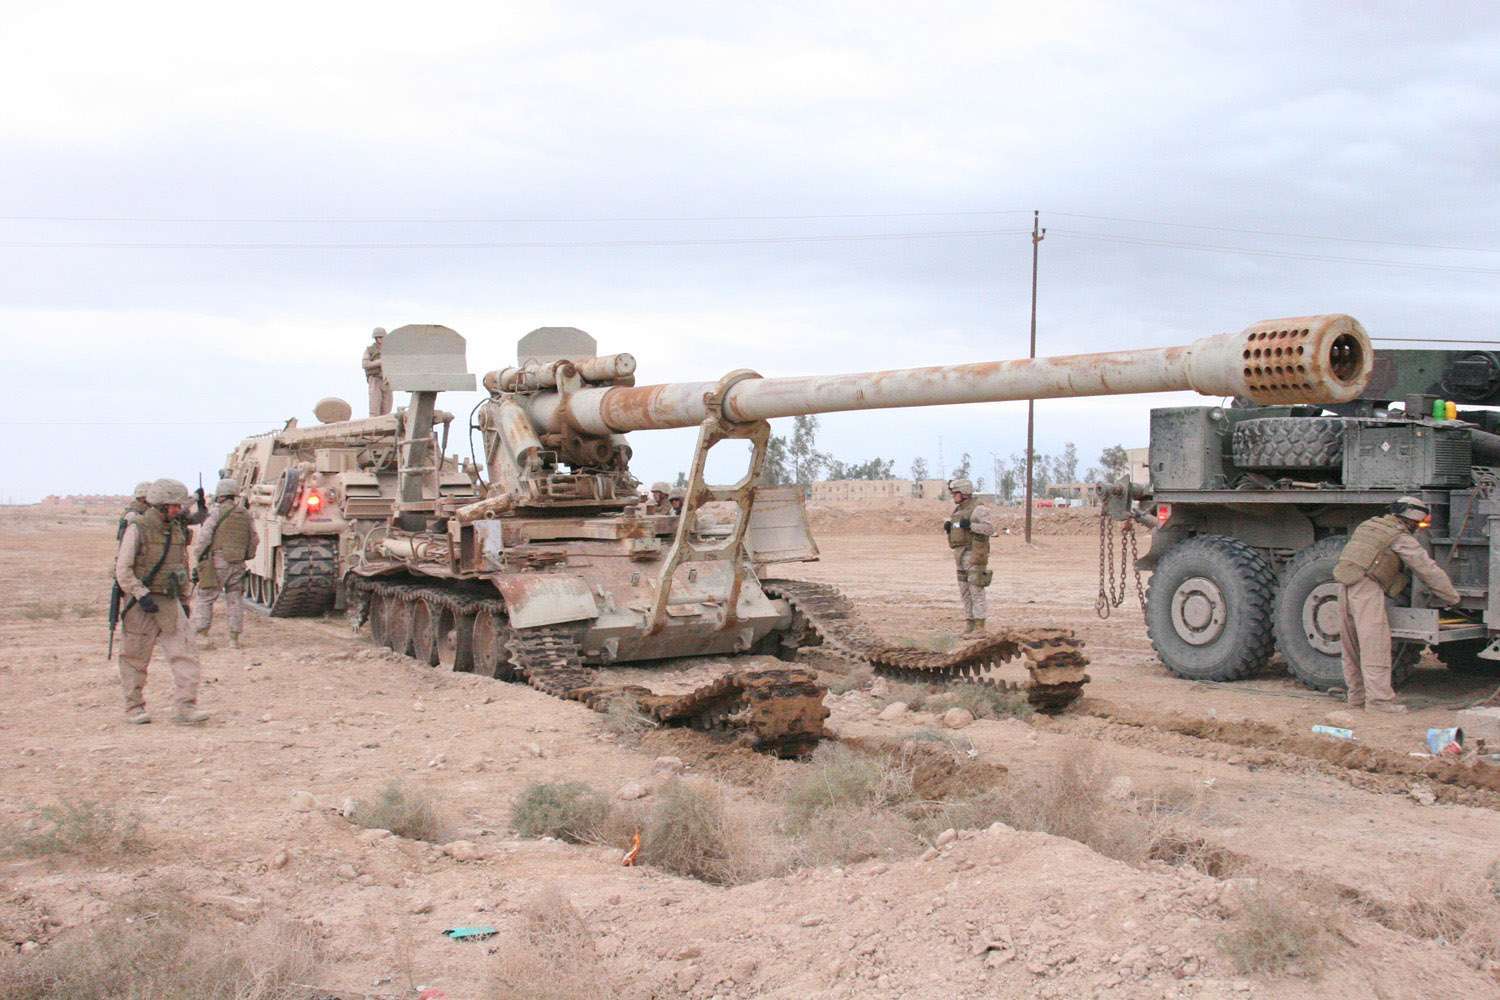 The Iraqi Koksan being pulled by an M88.